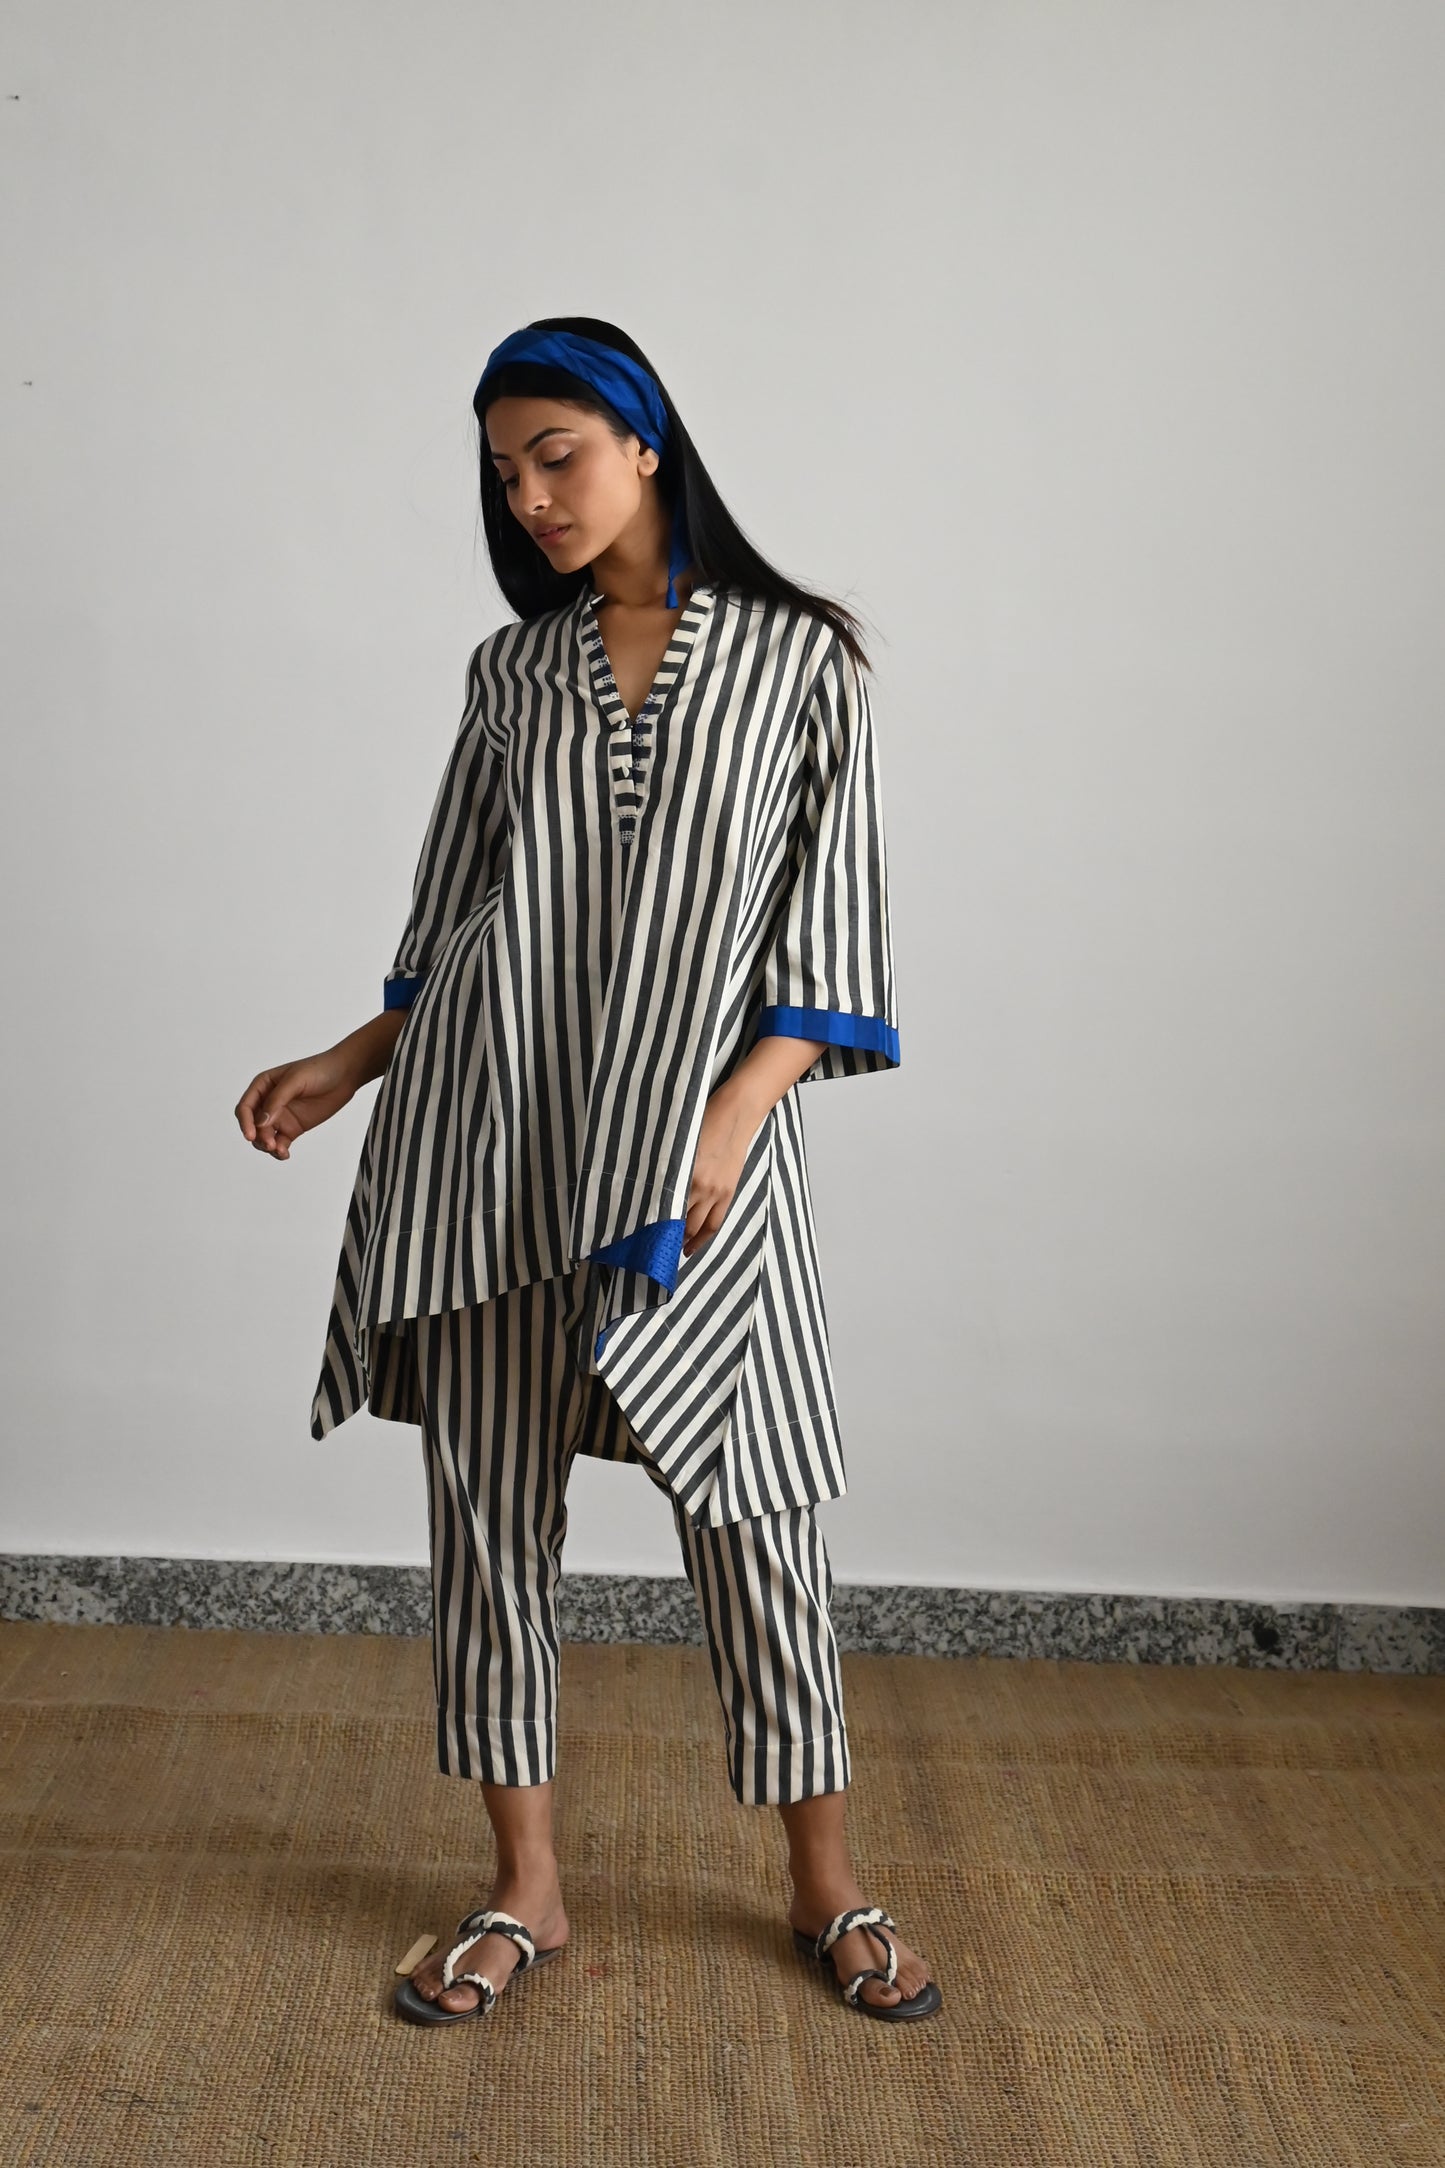 Oonch Neech Top in Black & White Stripes with Stripes Pant